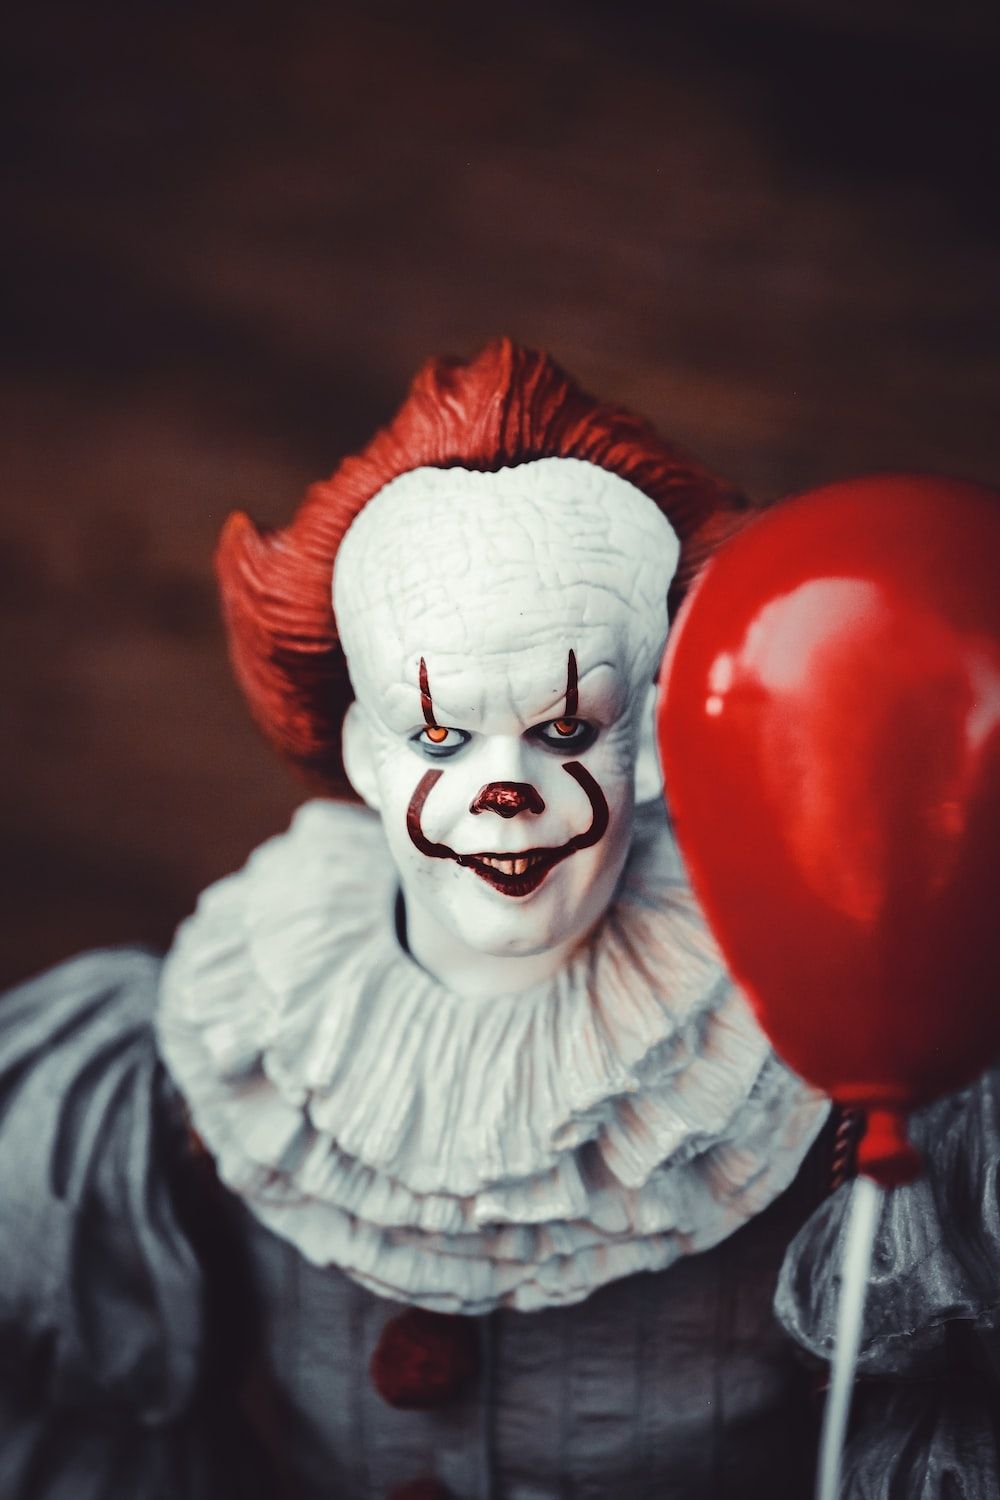 A close up of the clown from it - Clown